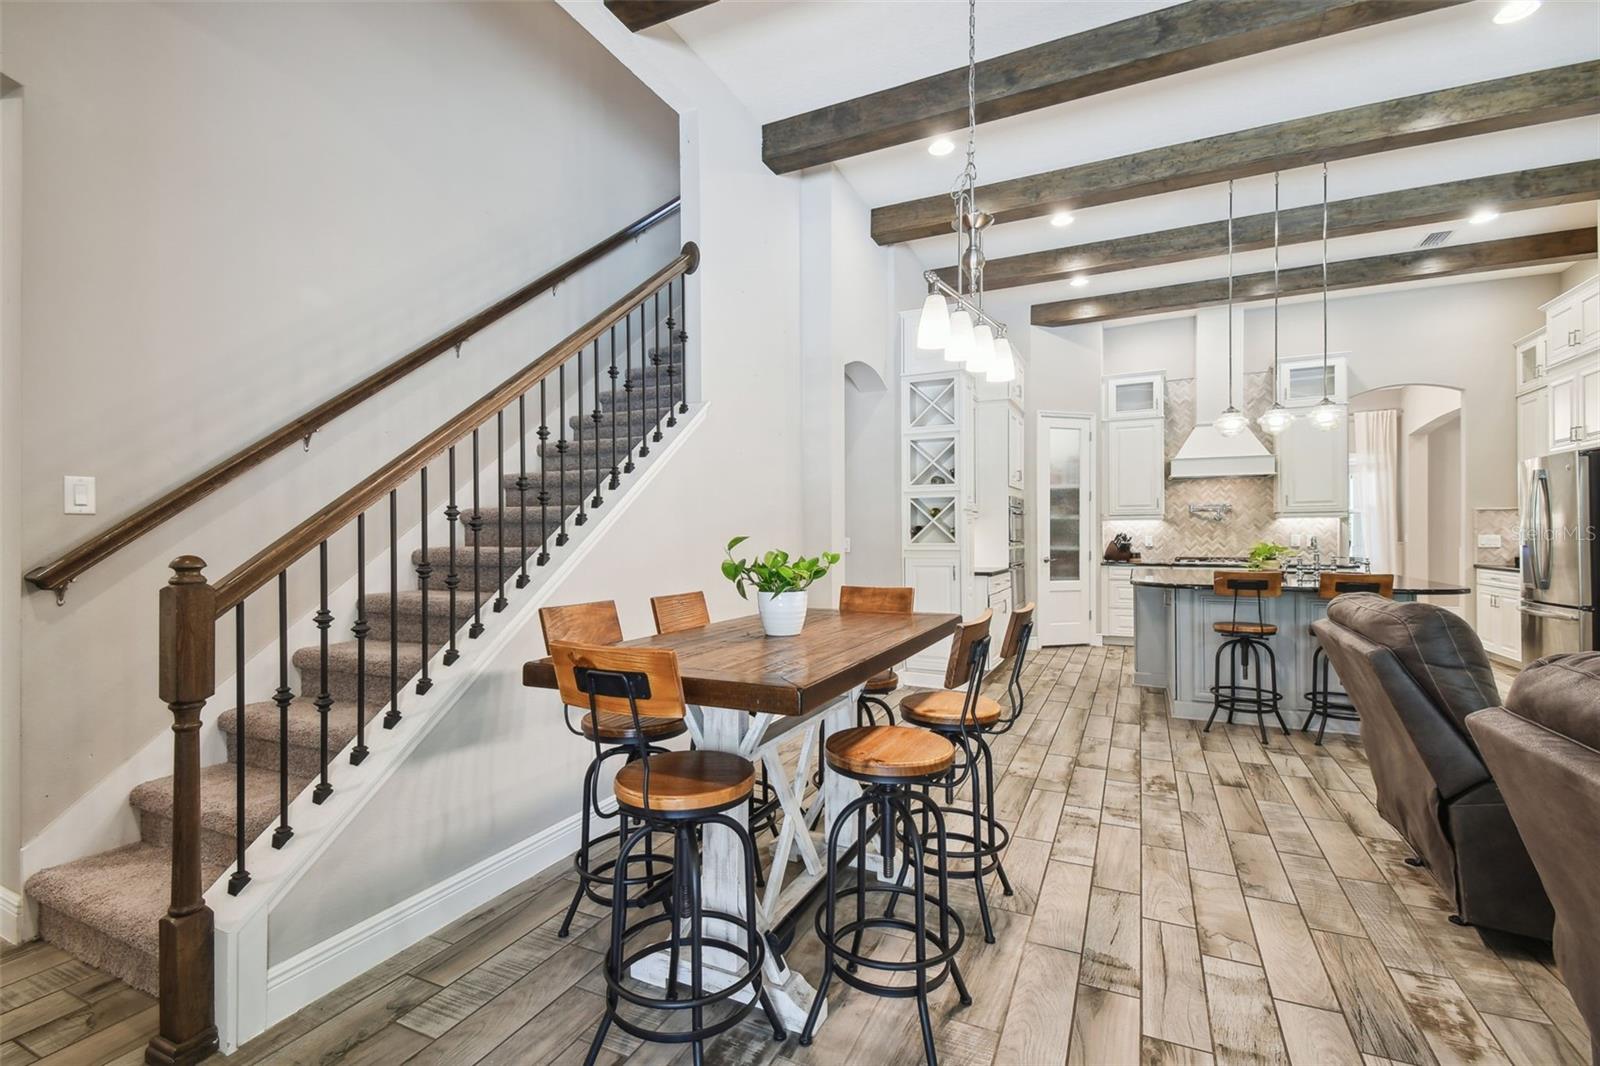 Gorgeous wood beams throughout the living room, kitchen and dining room